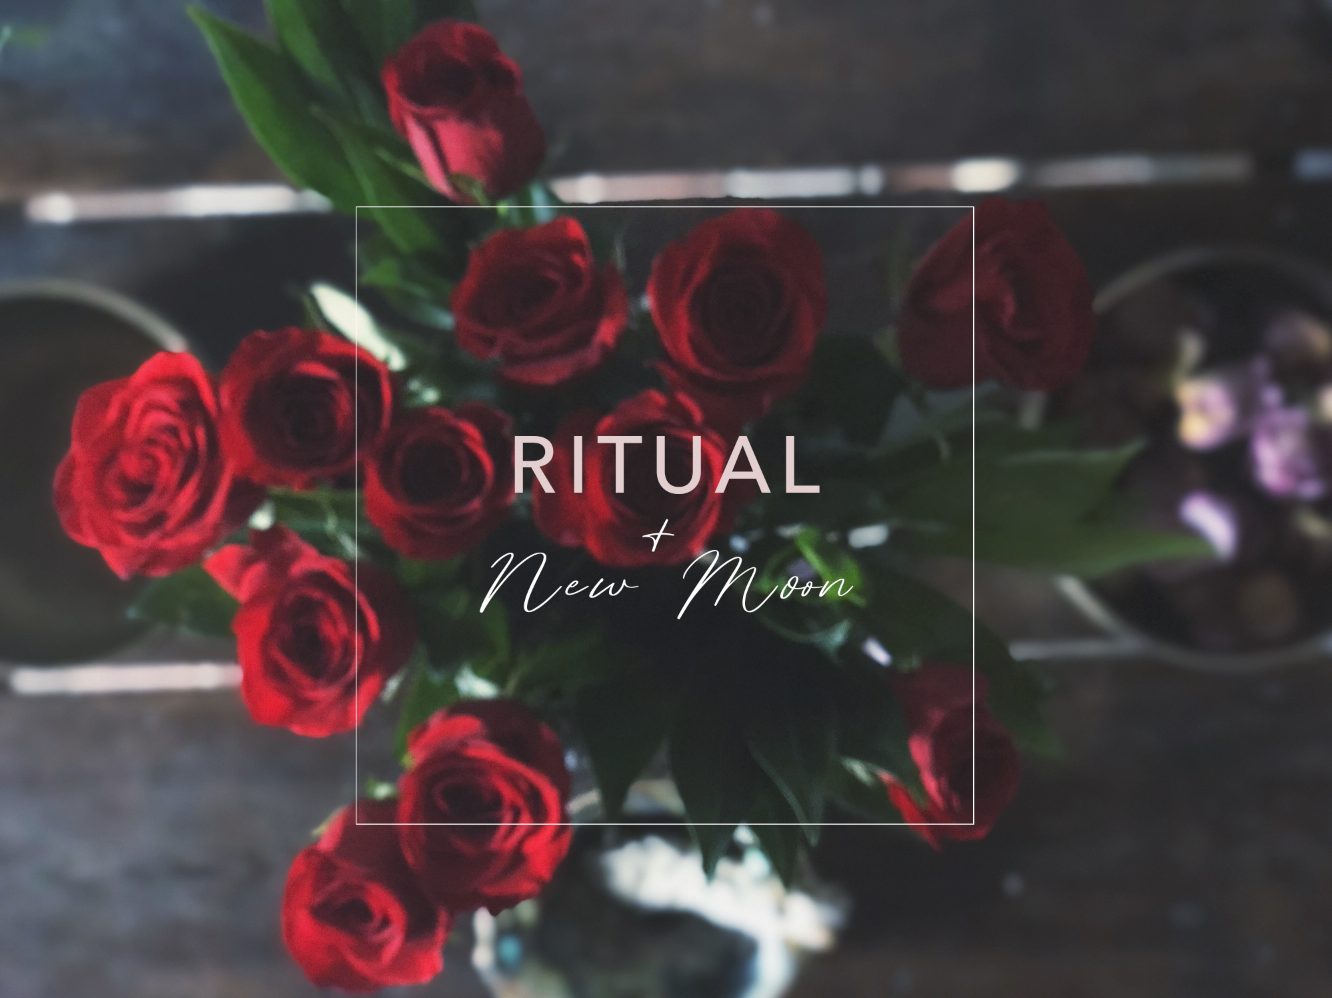 RITUAL AND THE NEW MOON